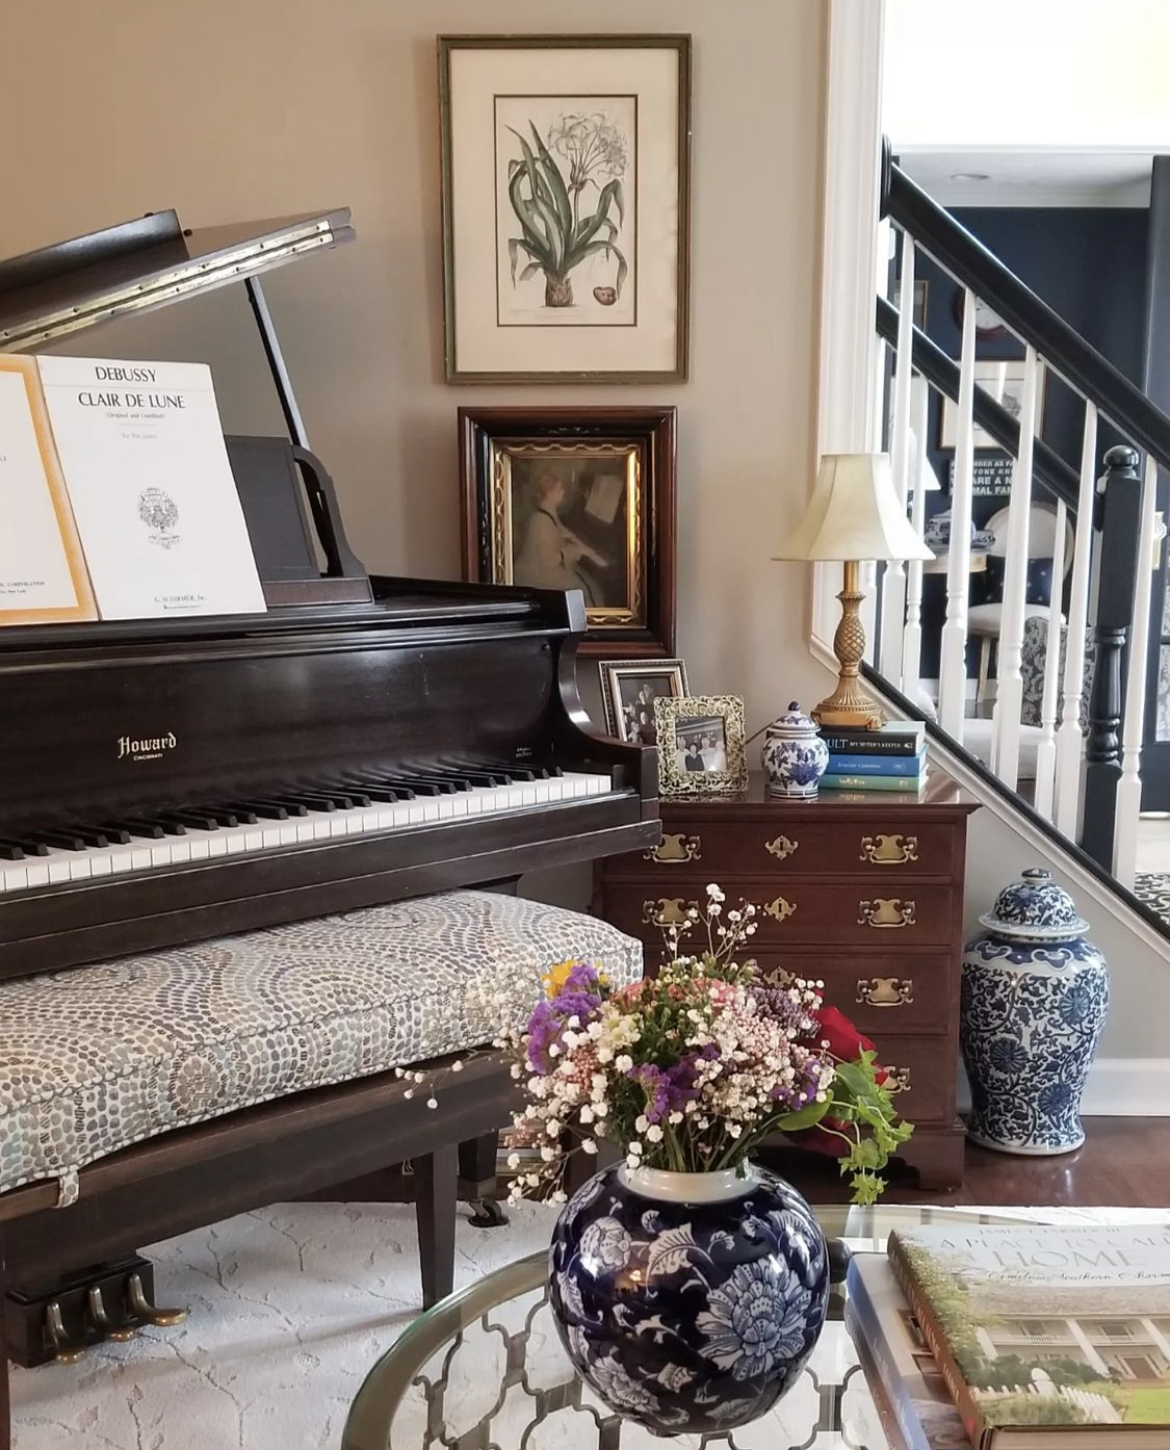 This beautiful music room features a Howard baby grand piano which is surrounded by classic chinoiserie elements including blue and white urns and a fun, modern mosaic patterned cushion on the long piano bench.